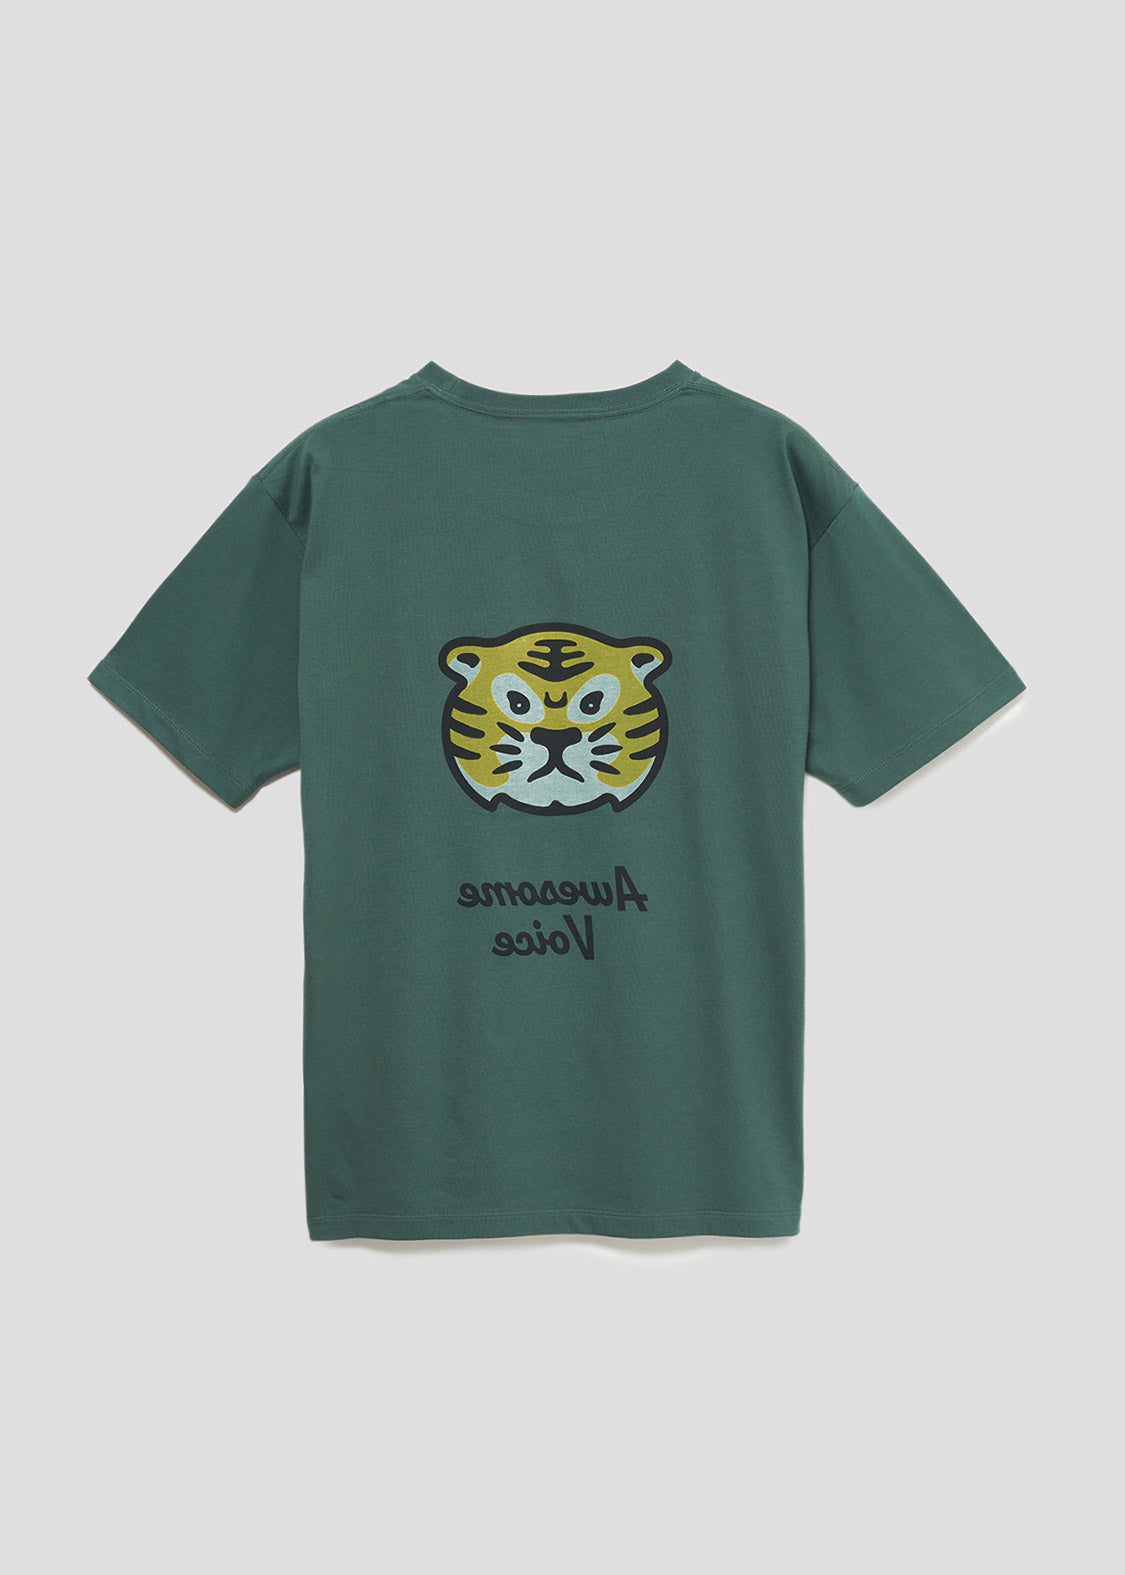 Loose Fit Short Sleeve Tee (Awesome Tiger)